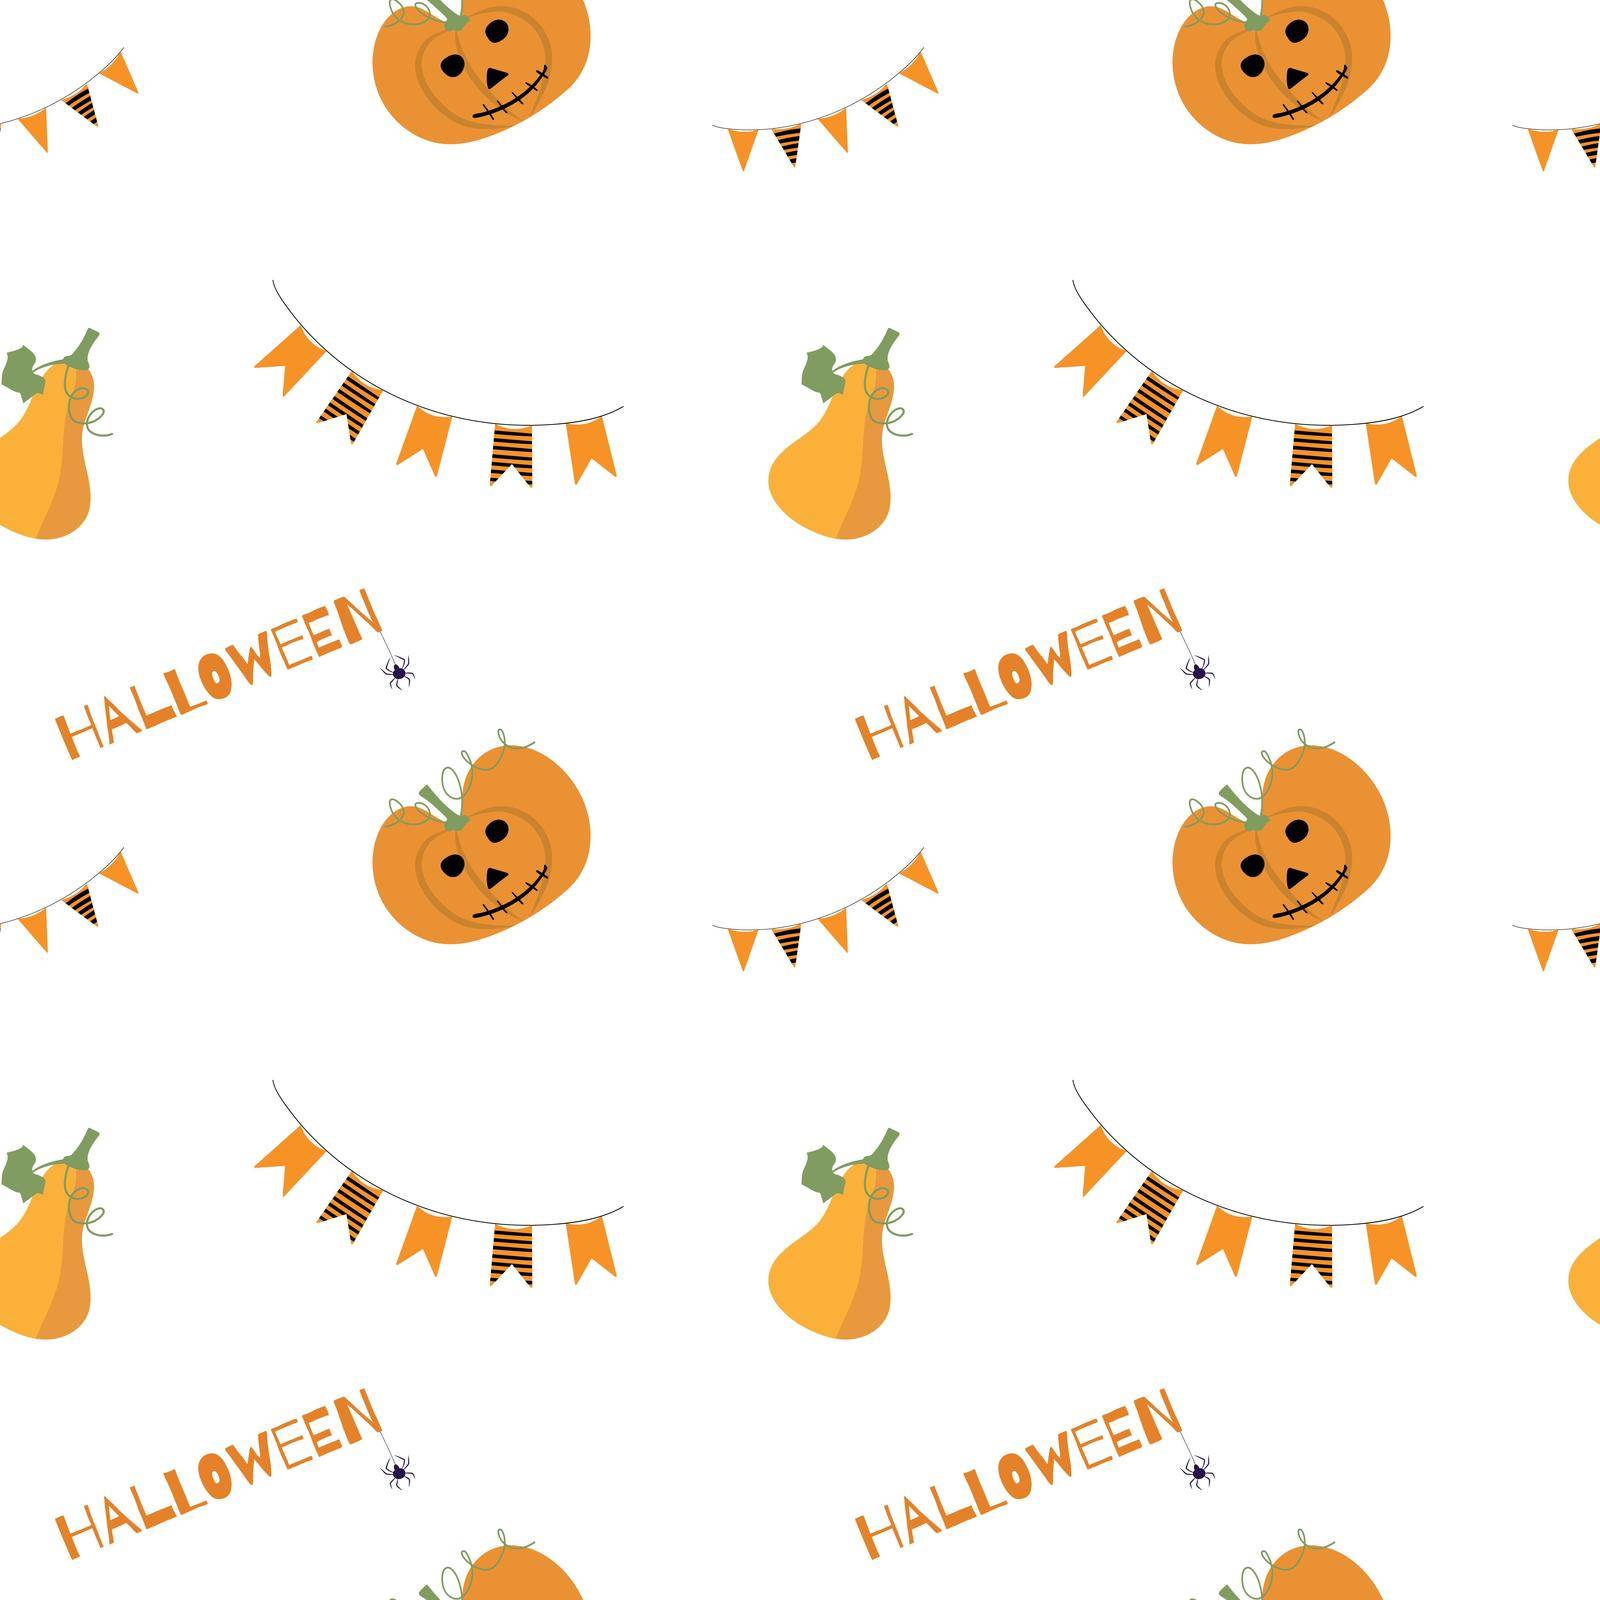 Pumpkins wearing witch hats with bats halloween seamless pattern with white background. Autumn october holiday paintings for decoration